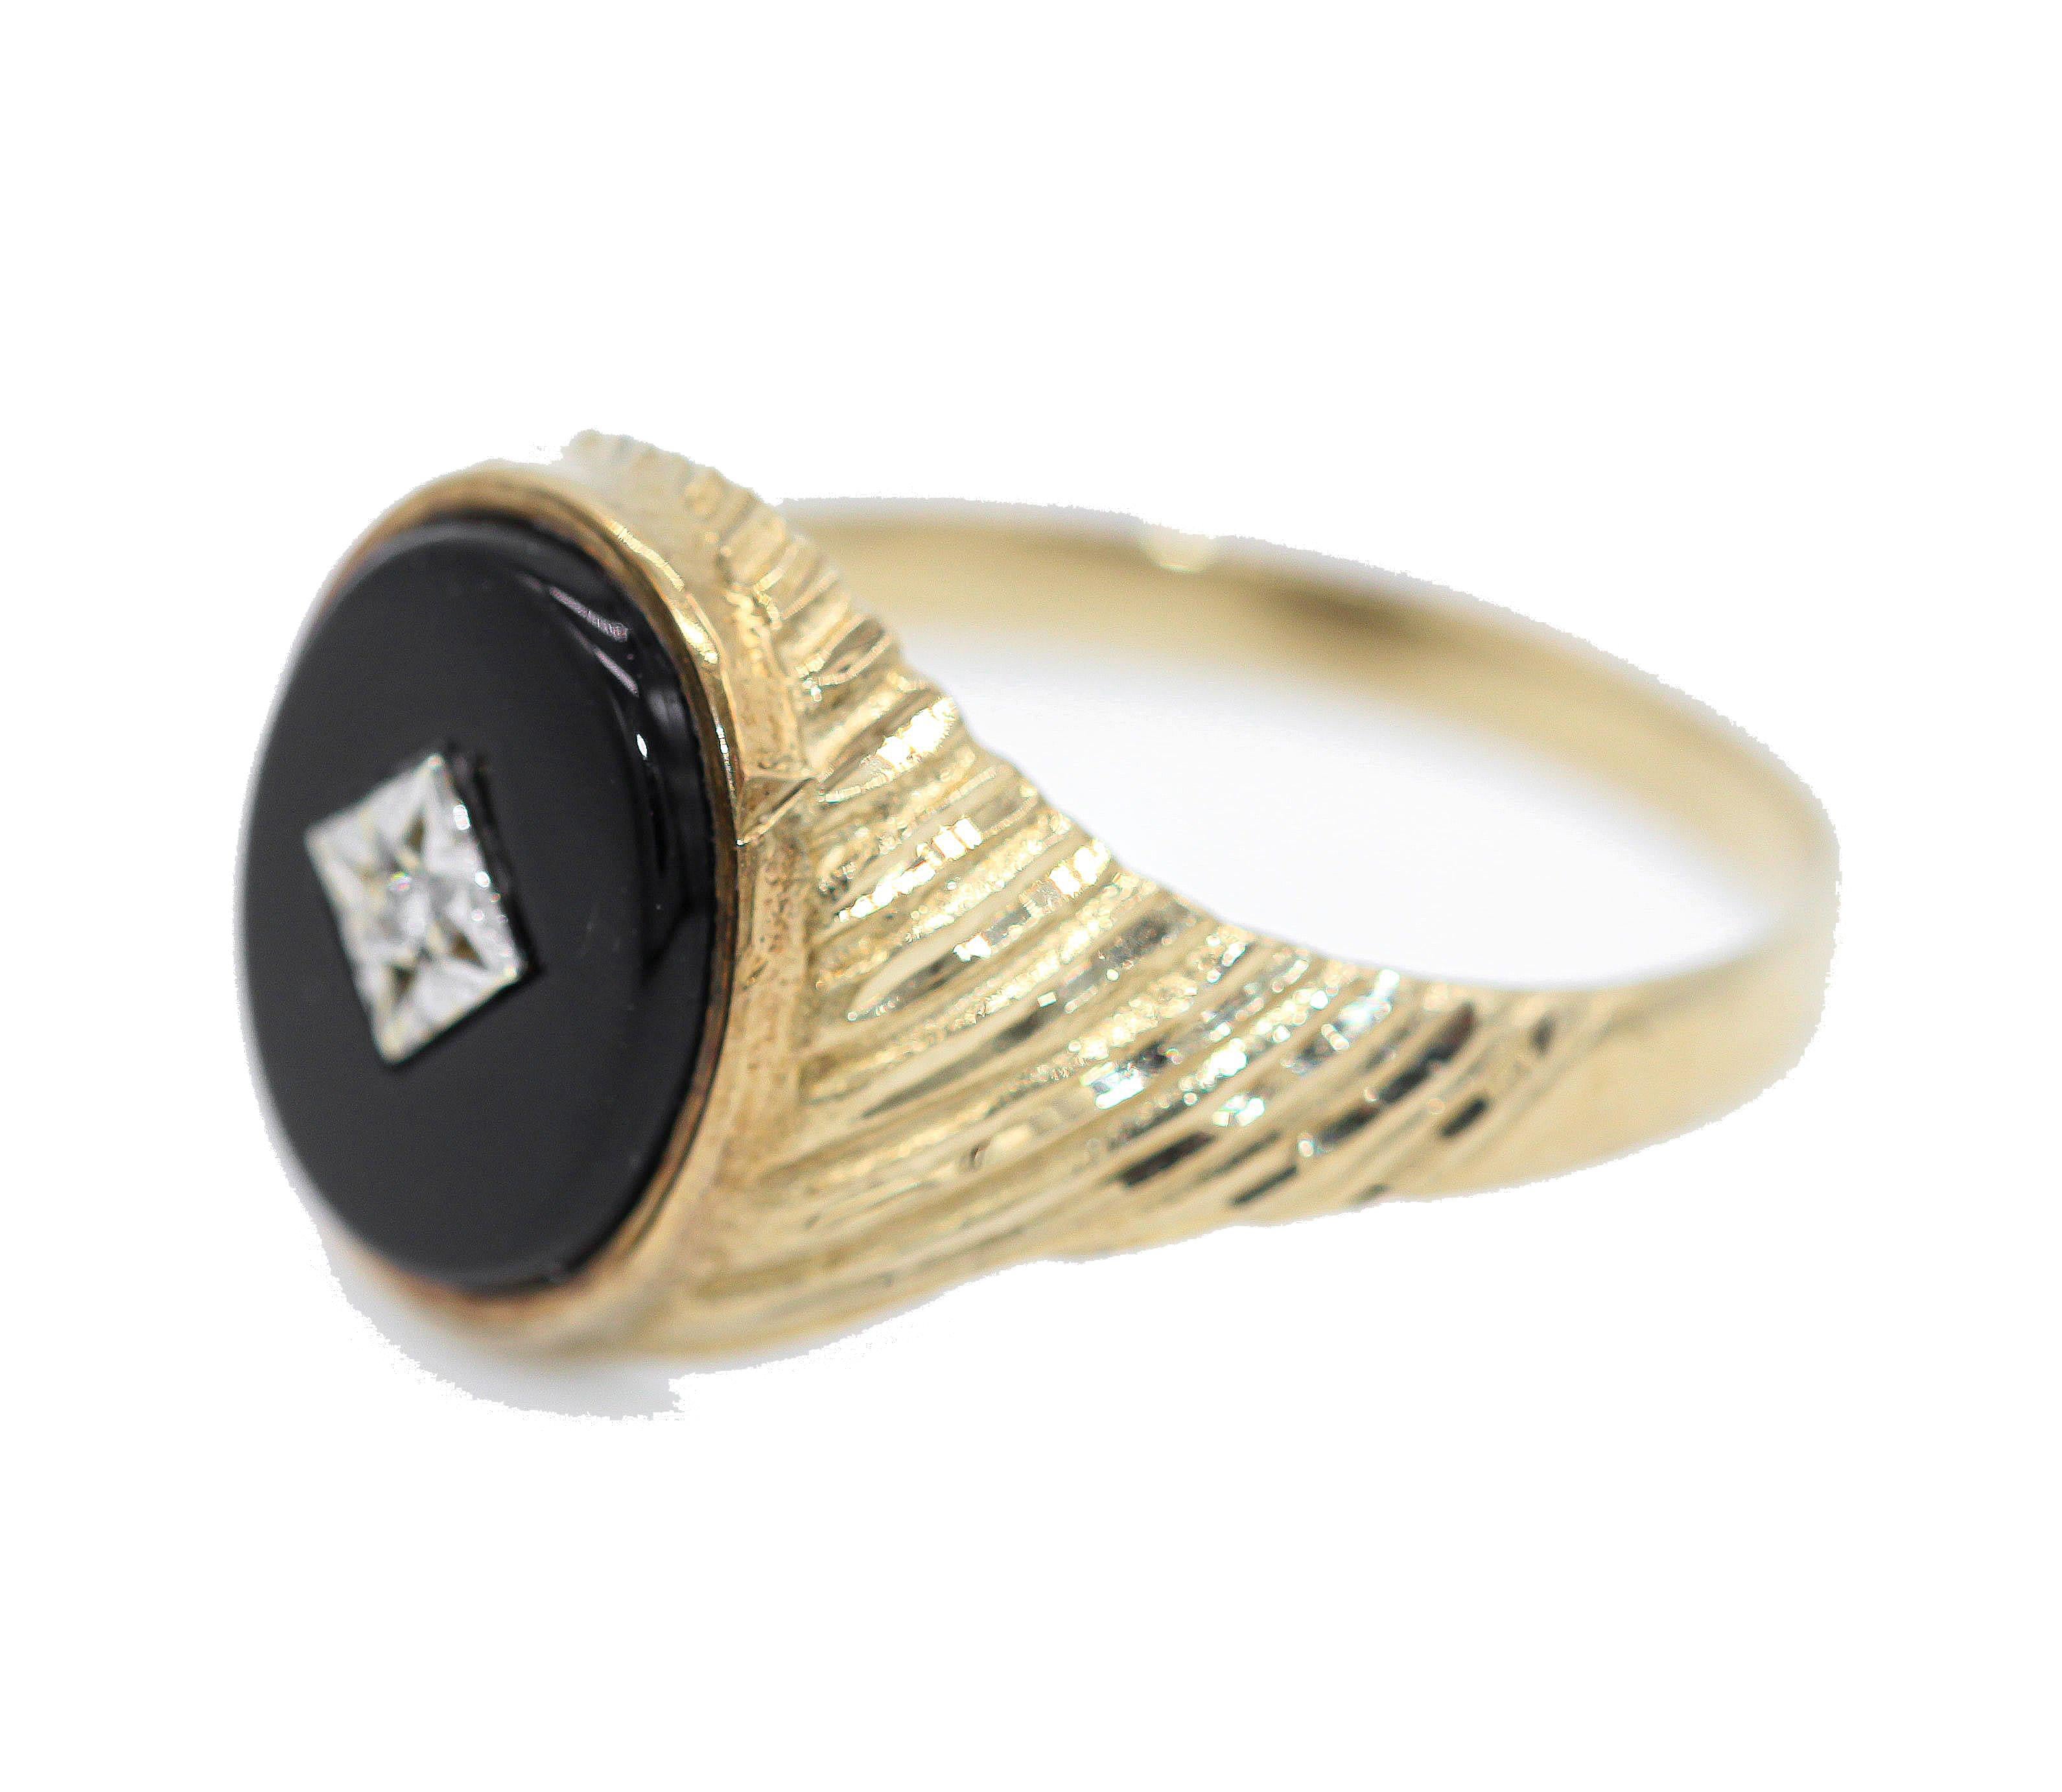  A 9 kt Yellow Gold, Onyx and Diamond Gentleman's Signet Ring with Oval Face. The central diamond in a square white gold setting on a black onyx oval and with ridged shoulders.
Hallmarked Birmingham 1964
UK  Size  X
USA  Size  12.5